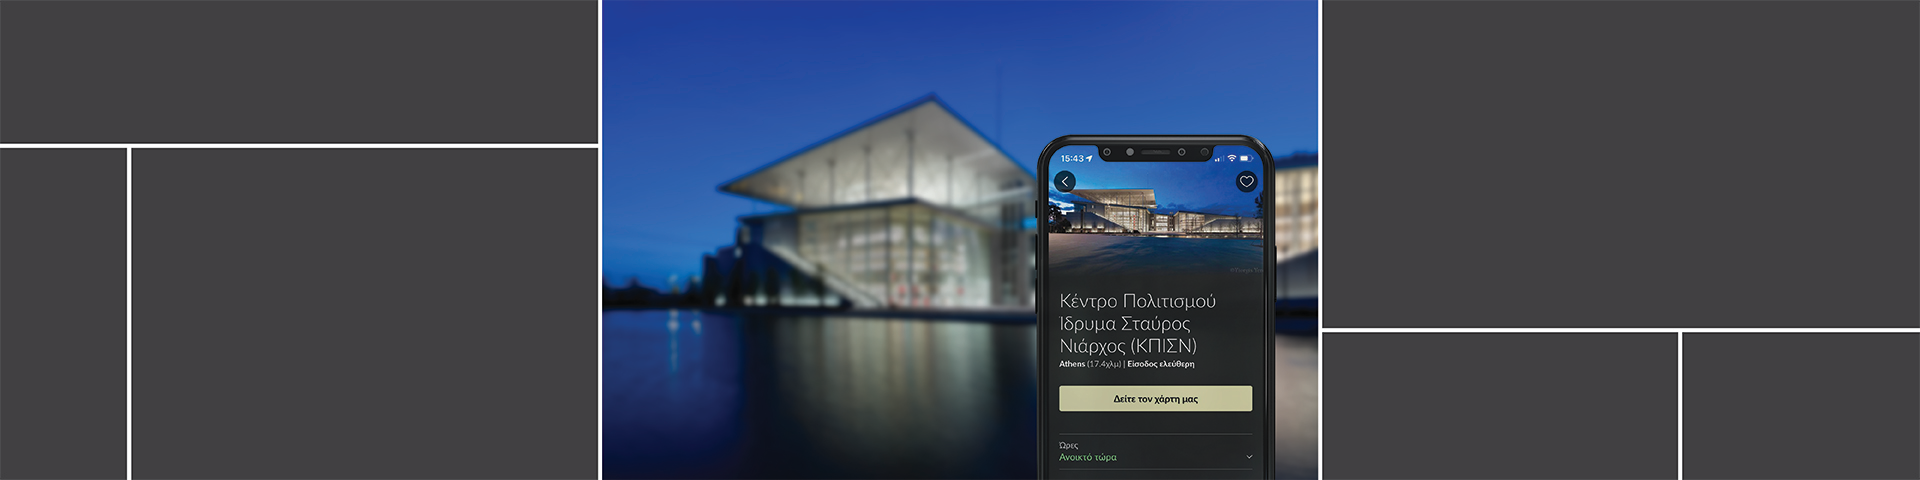 Explore SNFCC with Smartify - Εικόνα